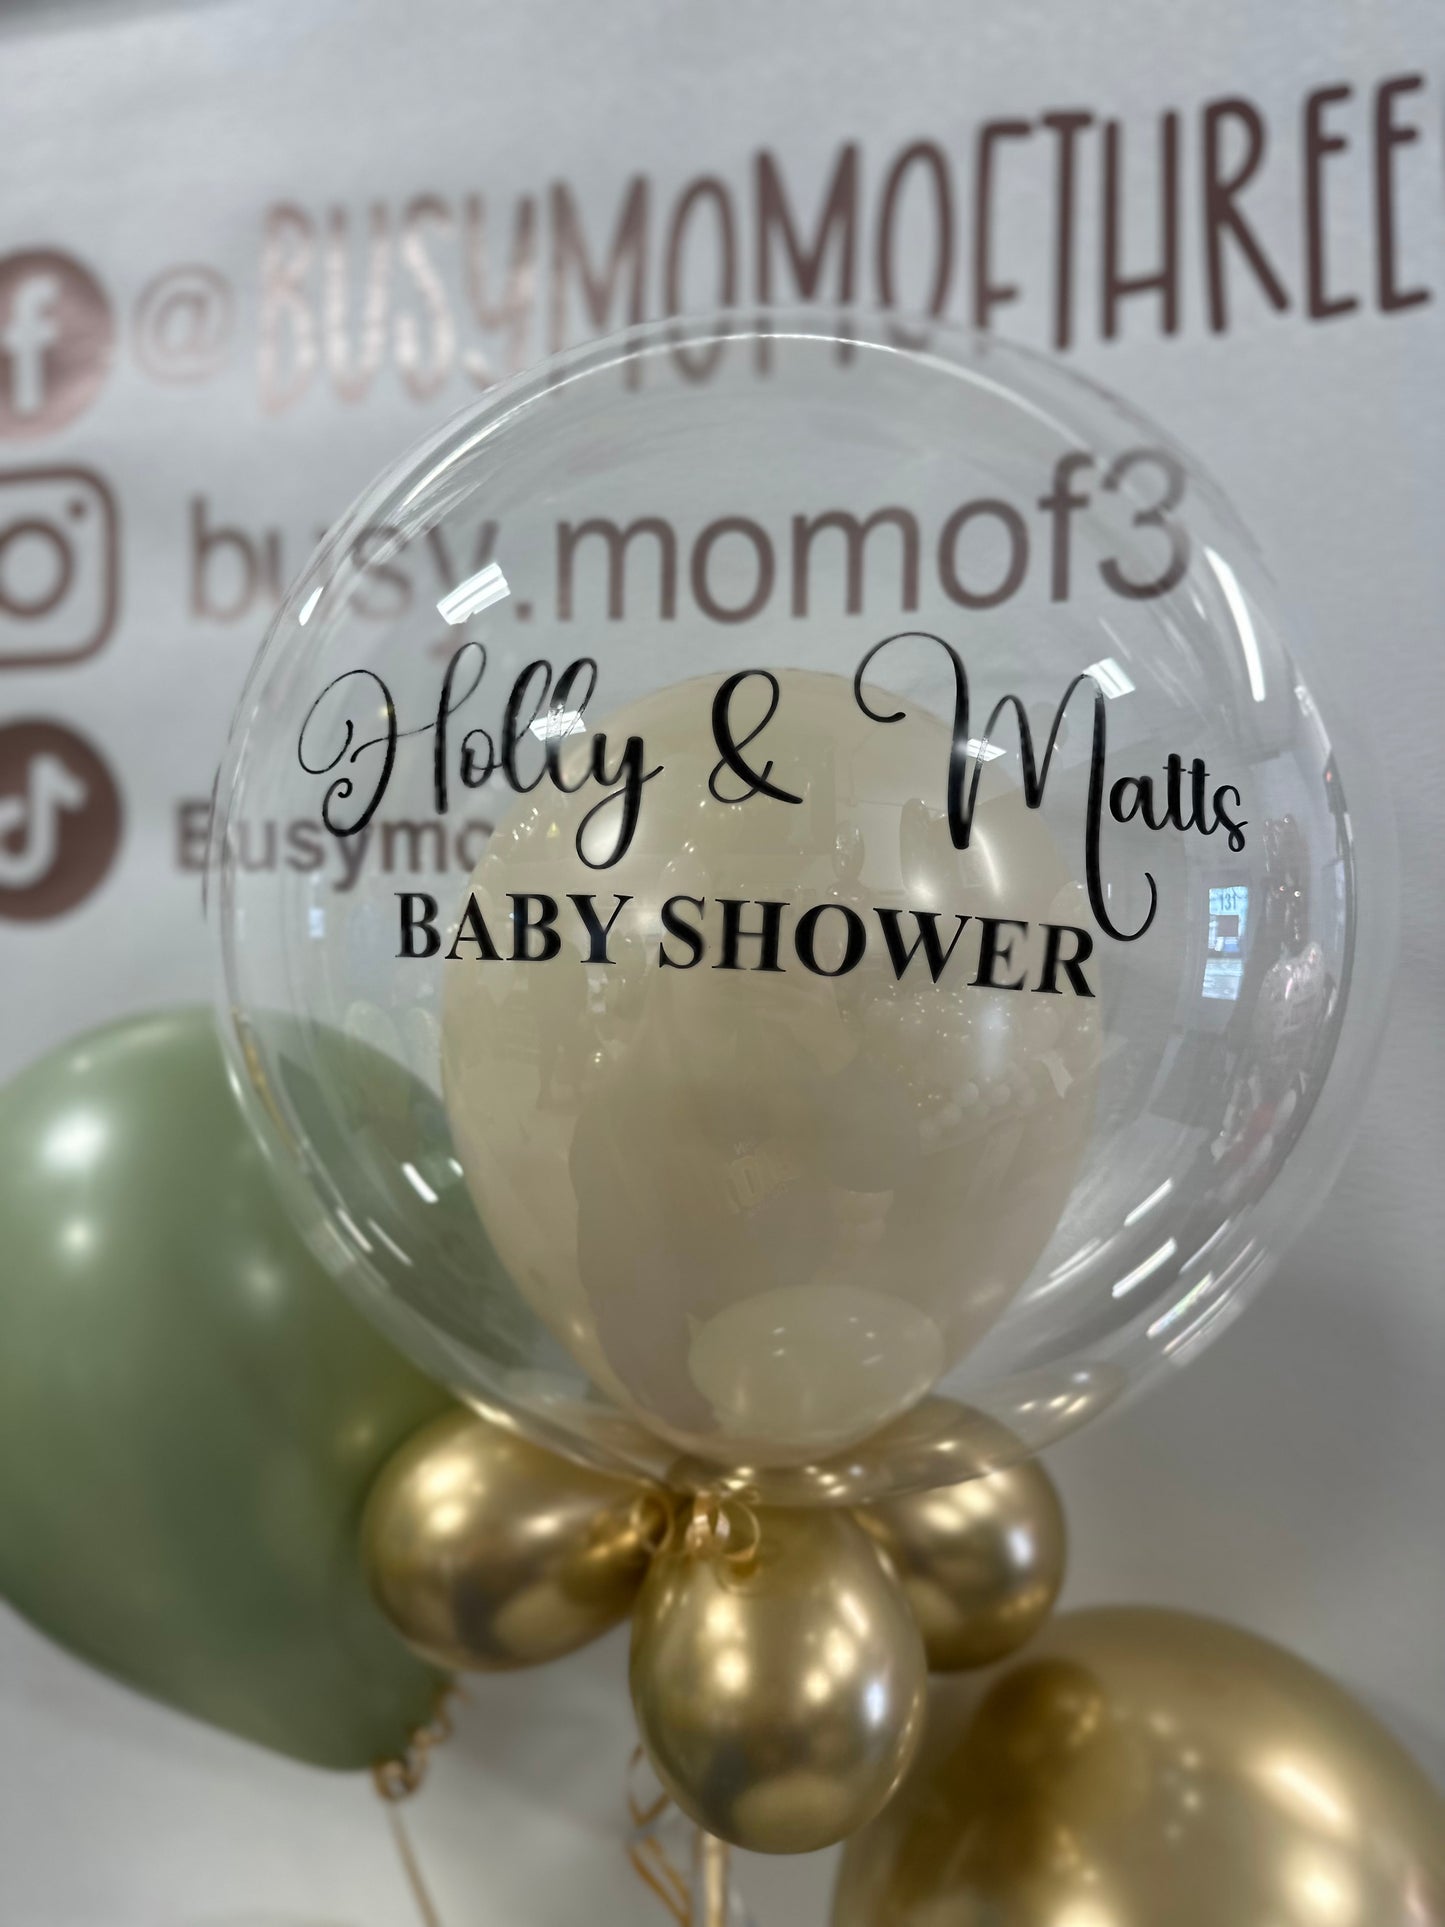 Baby Shower Bubble Balloon Display